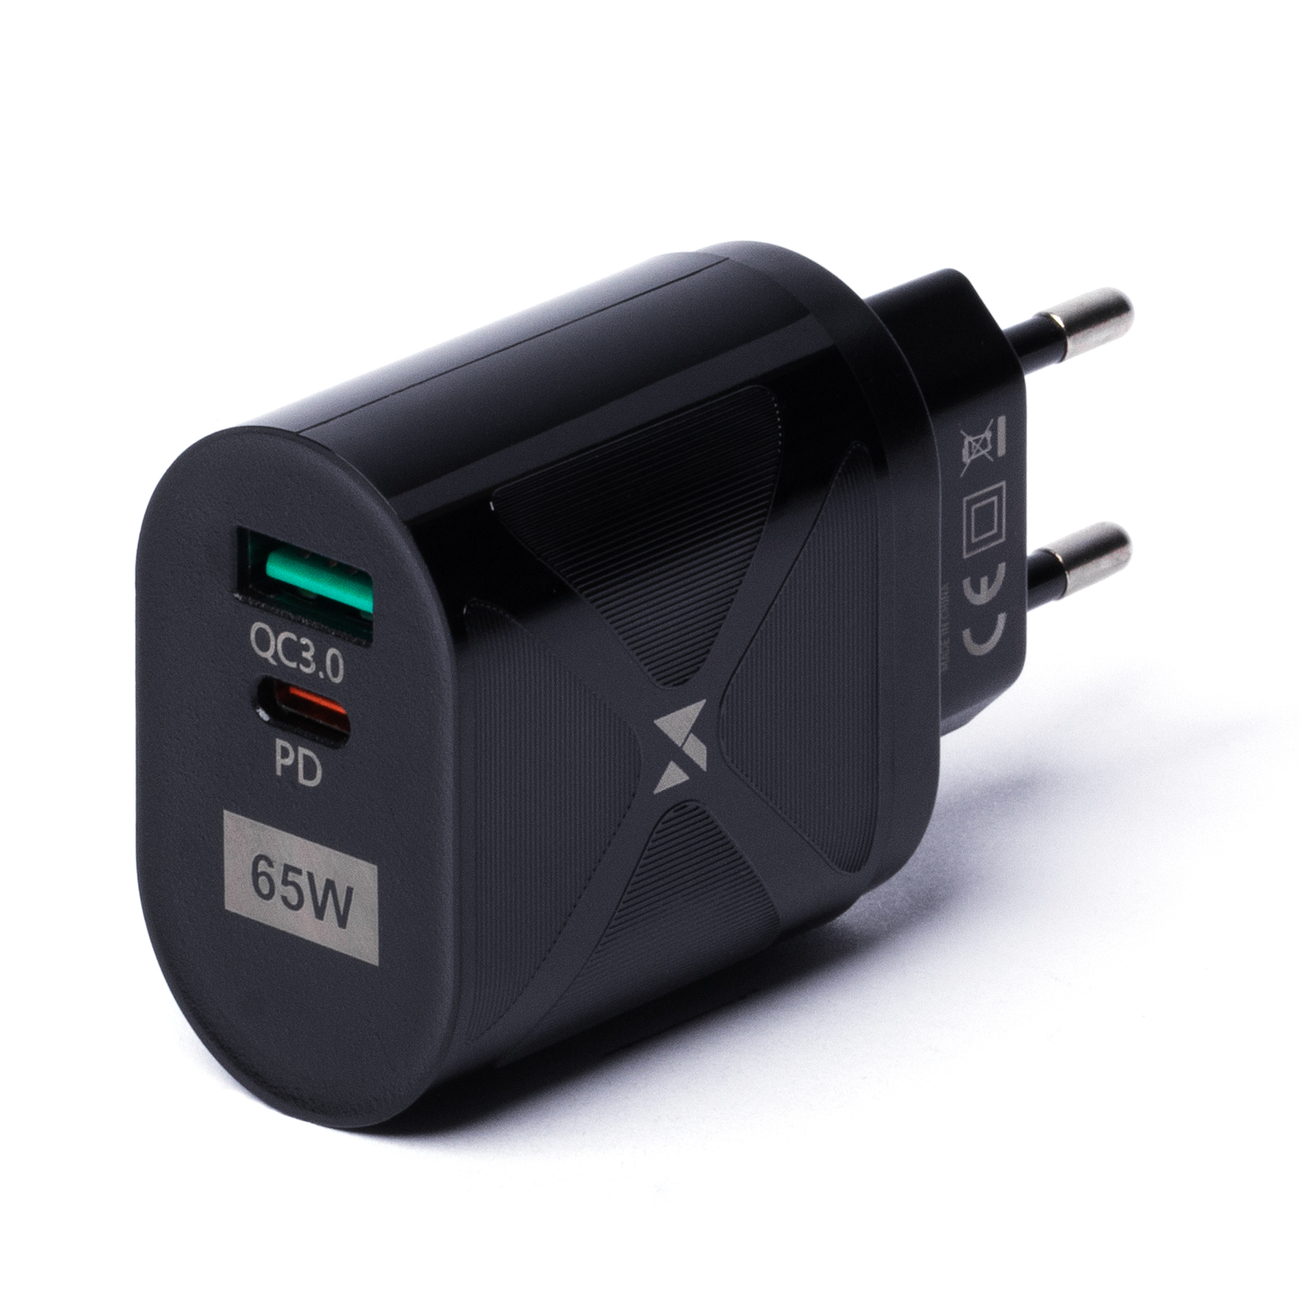 eng_pl_Wozinsky-small-65W-GaN-charger-with-USB-ports-USB-supports-fast-charging-black-WWCGM1-108276_12